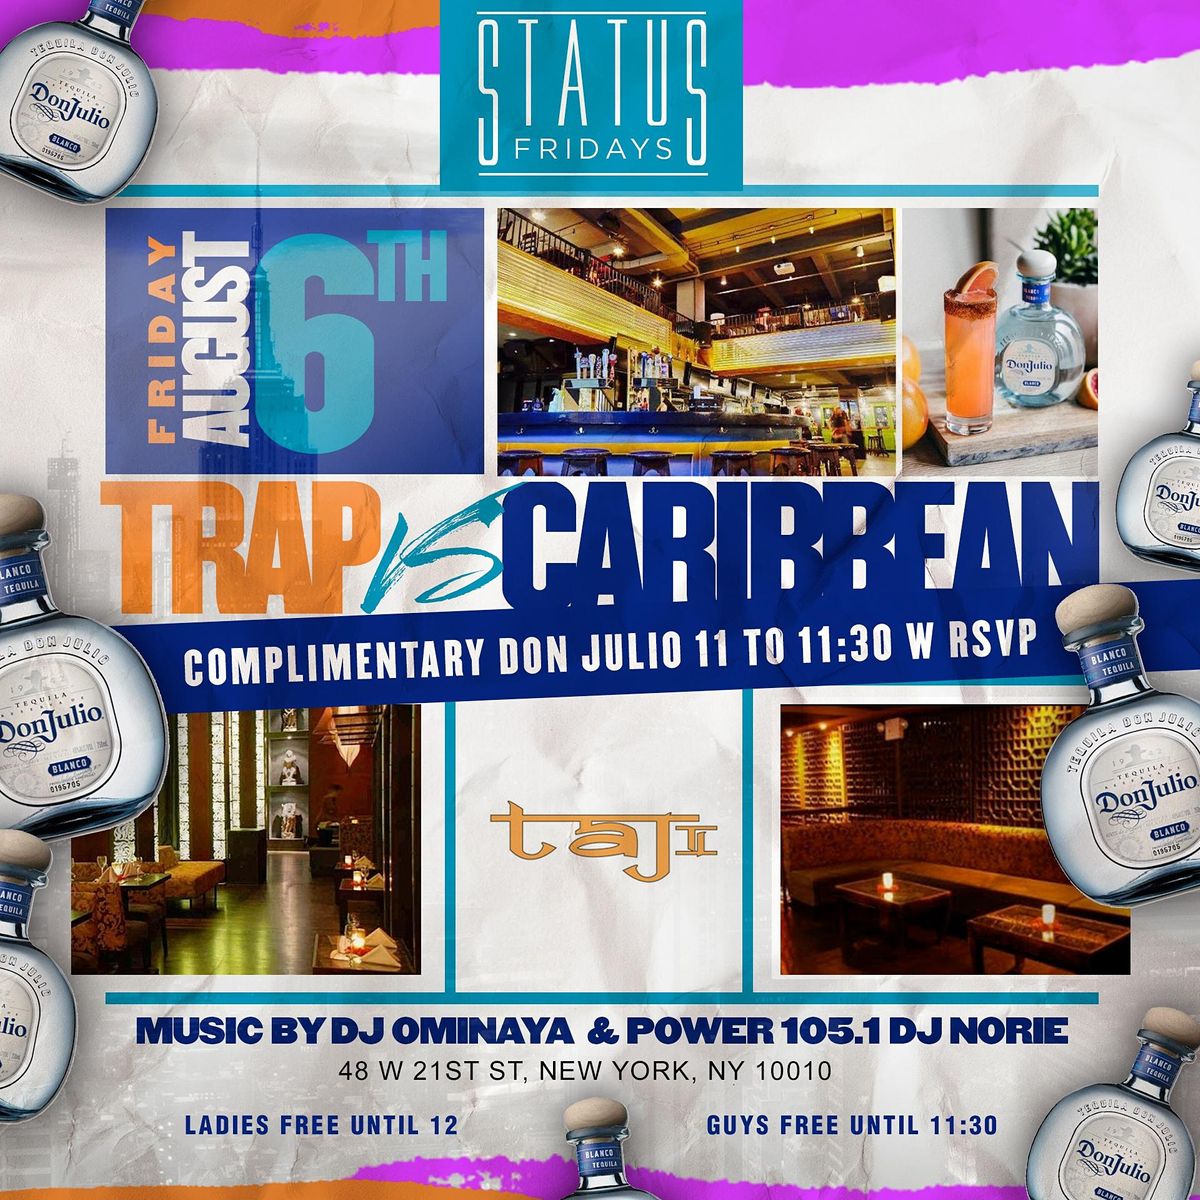 Trap vs Caribbean  @ Status Fridays : Everyone Free Entry with Rsvp